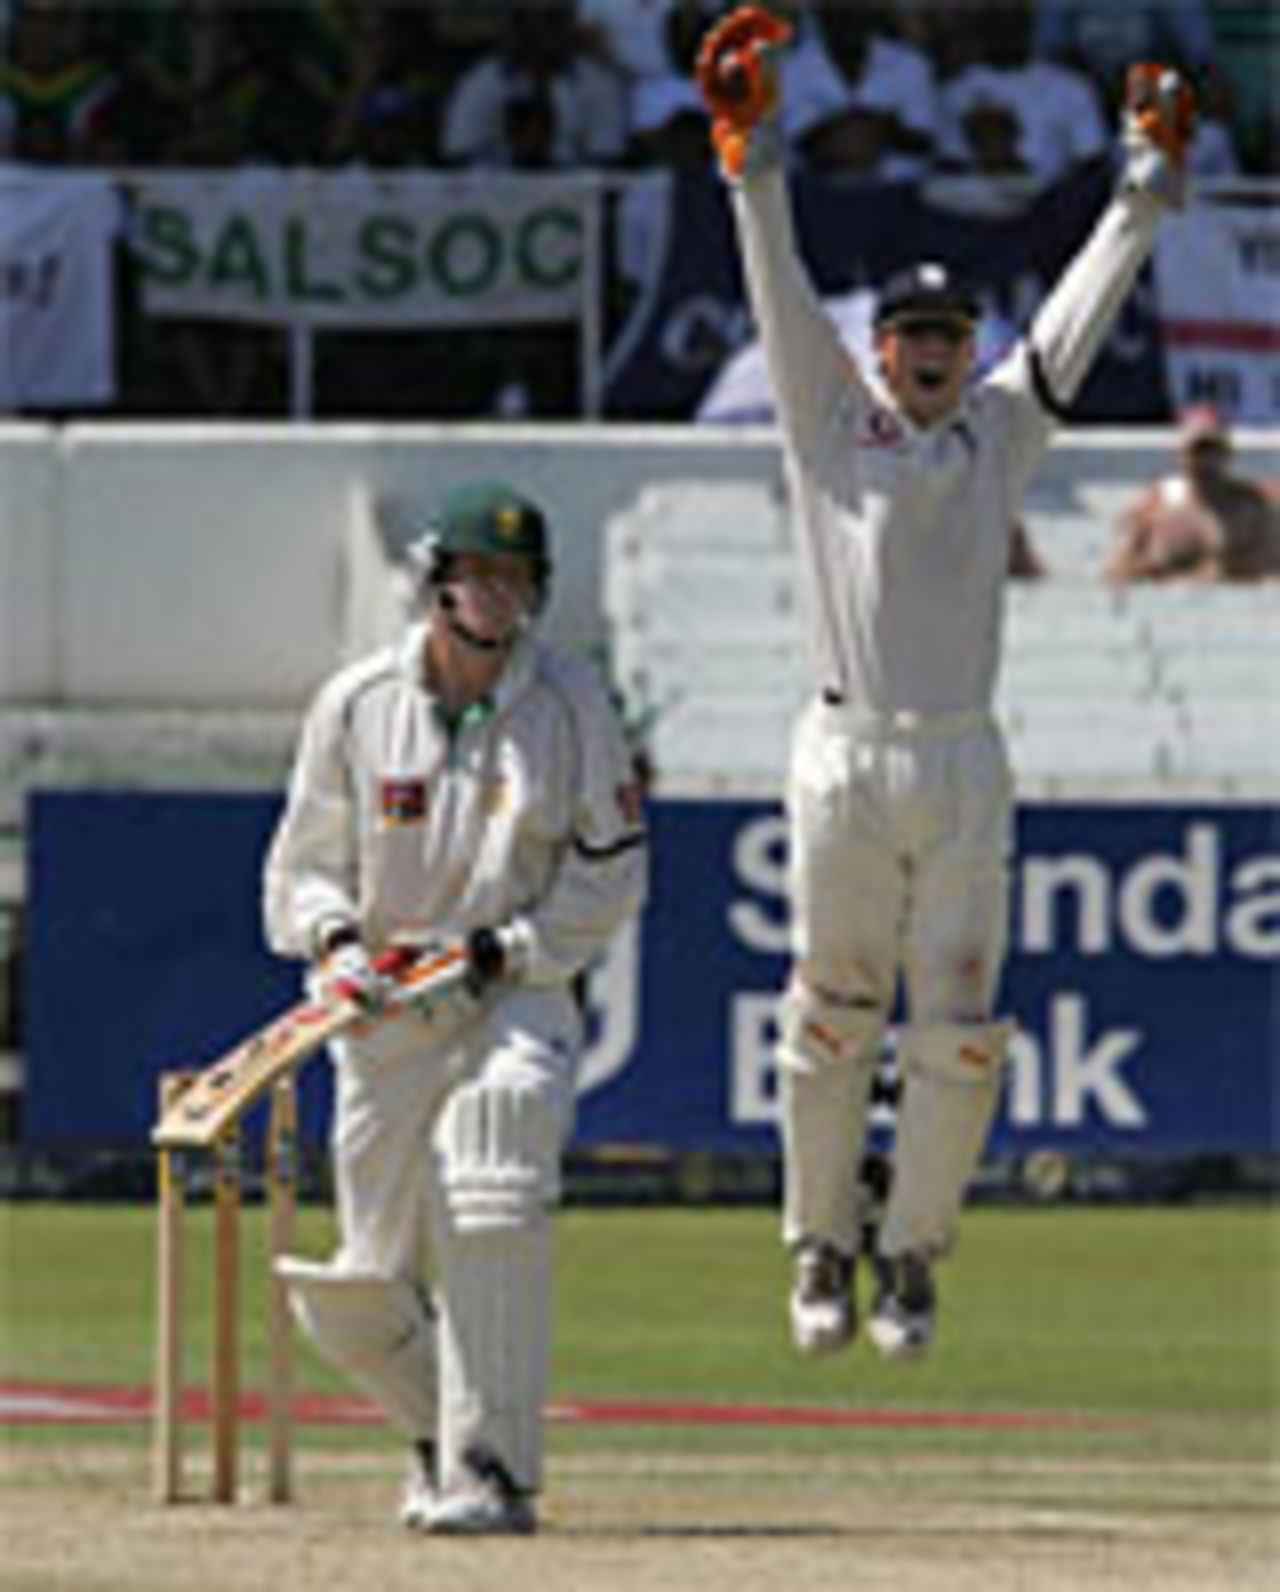 Geraint Jones celebrates catching Shaun Pollock on the second day of the second Test at Durban, South Africa v England, December 27, 2004